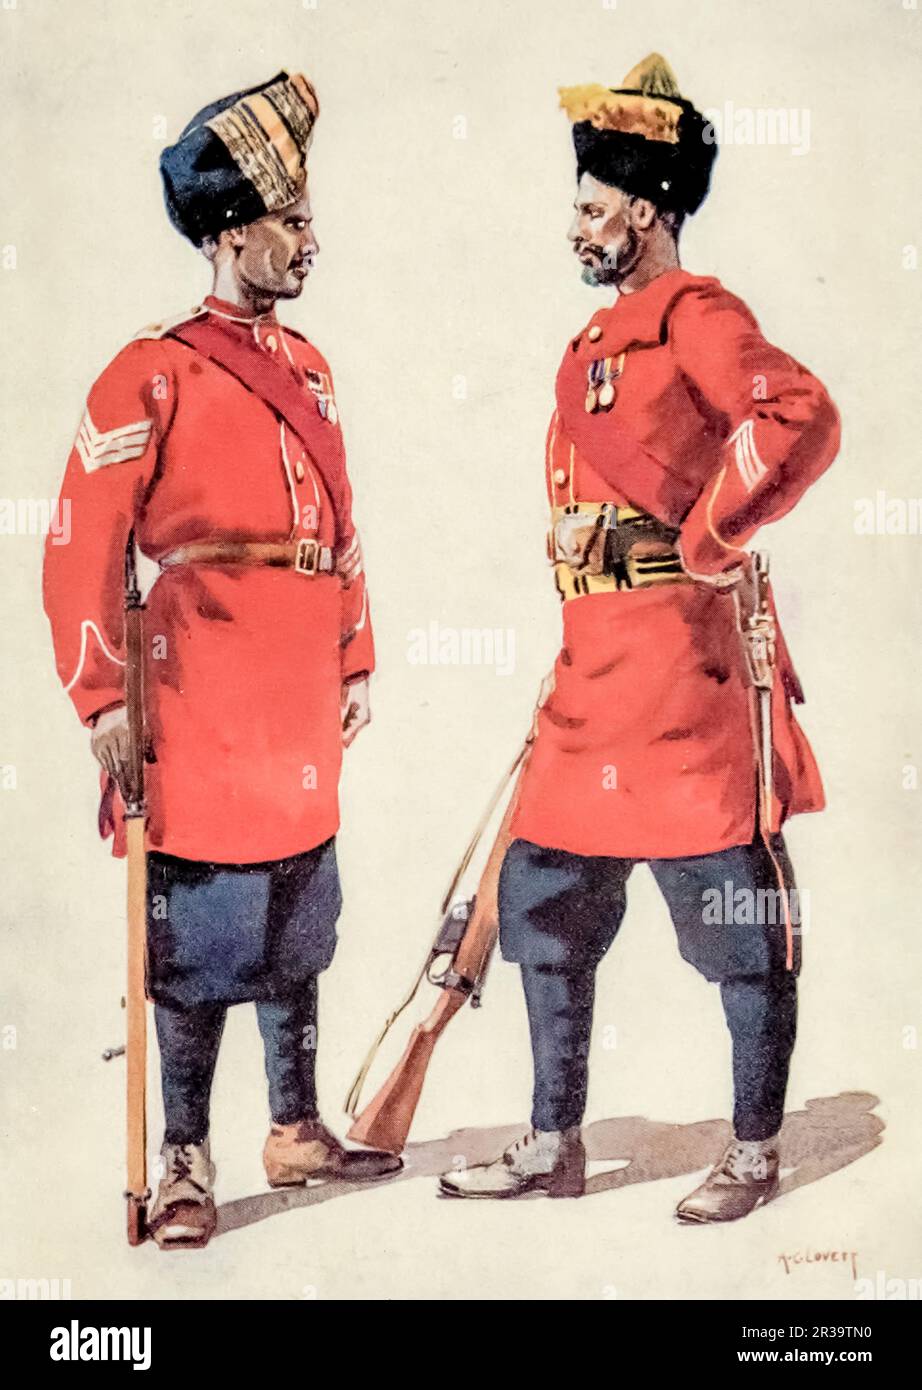 Havildar (Sergeants) of the 5th Light Infantry (left) and 6th Jat Light Infantry 9right) painted by Major Alfred Crowdy Lovett, (1862-1919) from the book ' The armies of India ' by Major George Fletcher MacMunn, (1869-1952) Publication date 1911 Publisher London, Adam and Charles Black Stock Photo